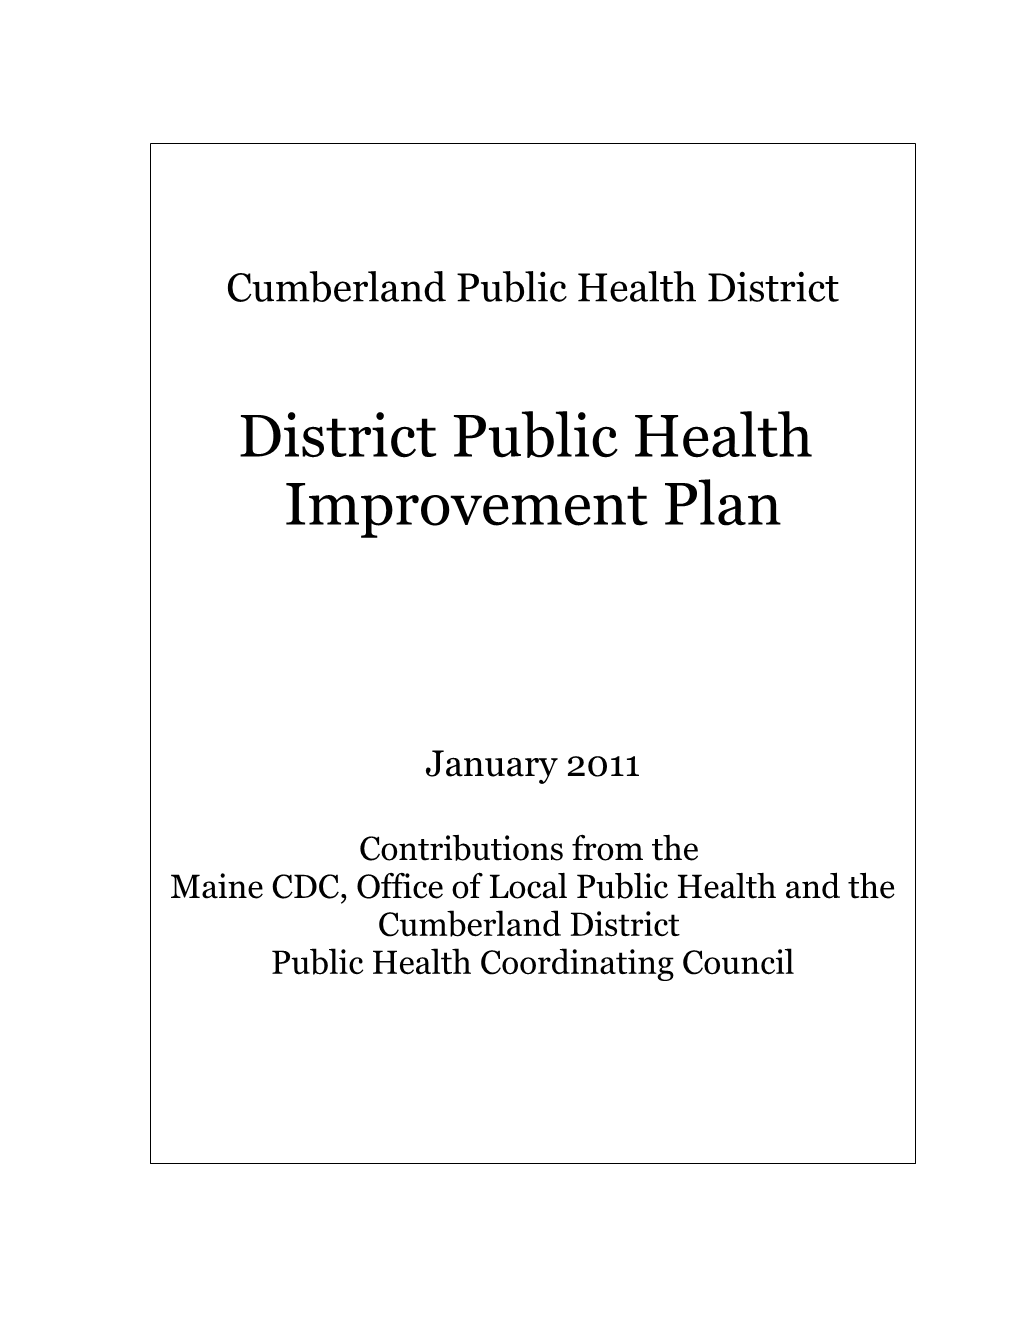 Mainecenter for Disease Control & Prevention, Office of Local Public Health (DHHS)